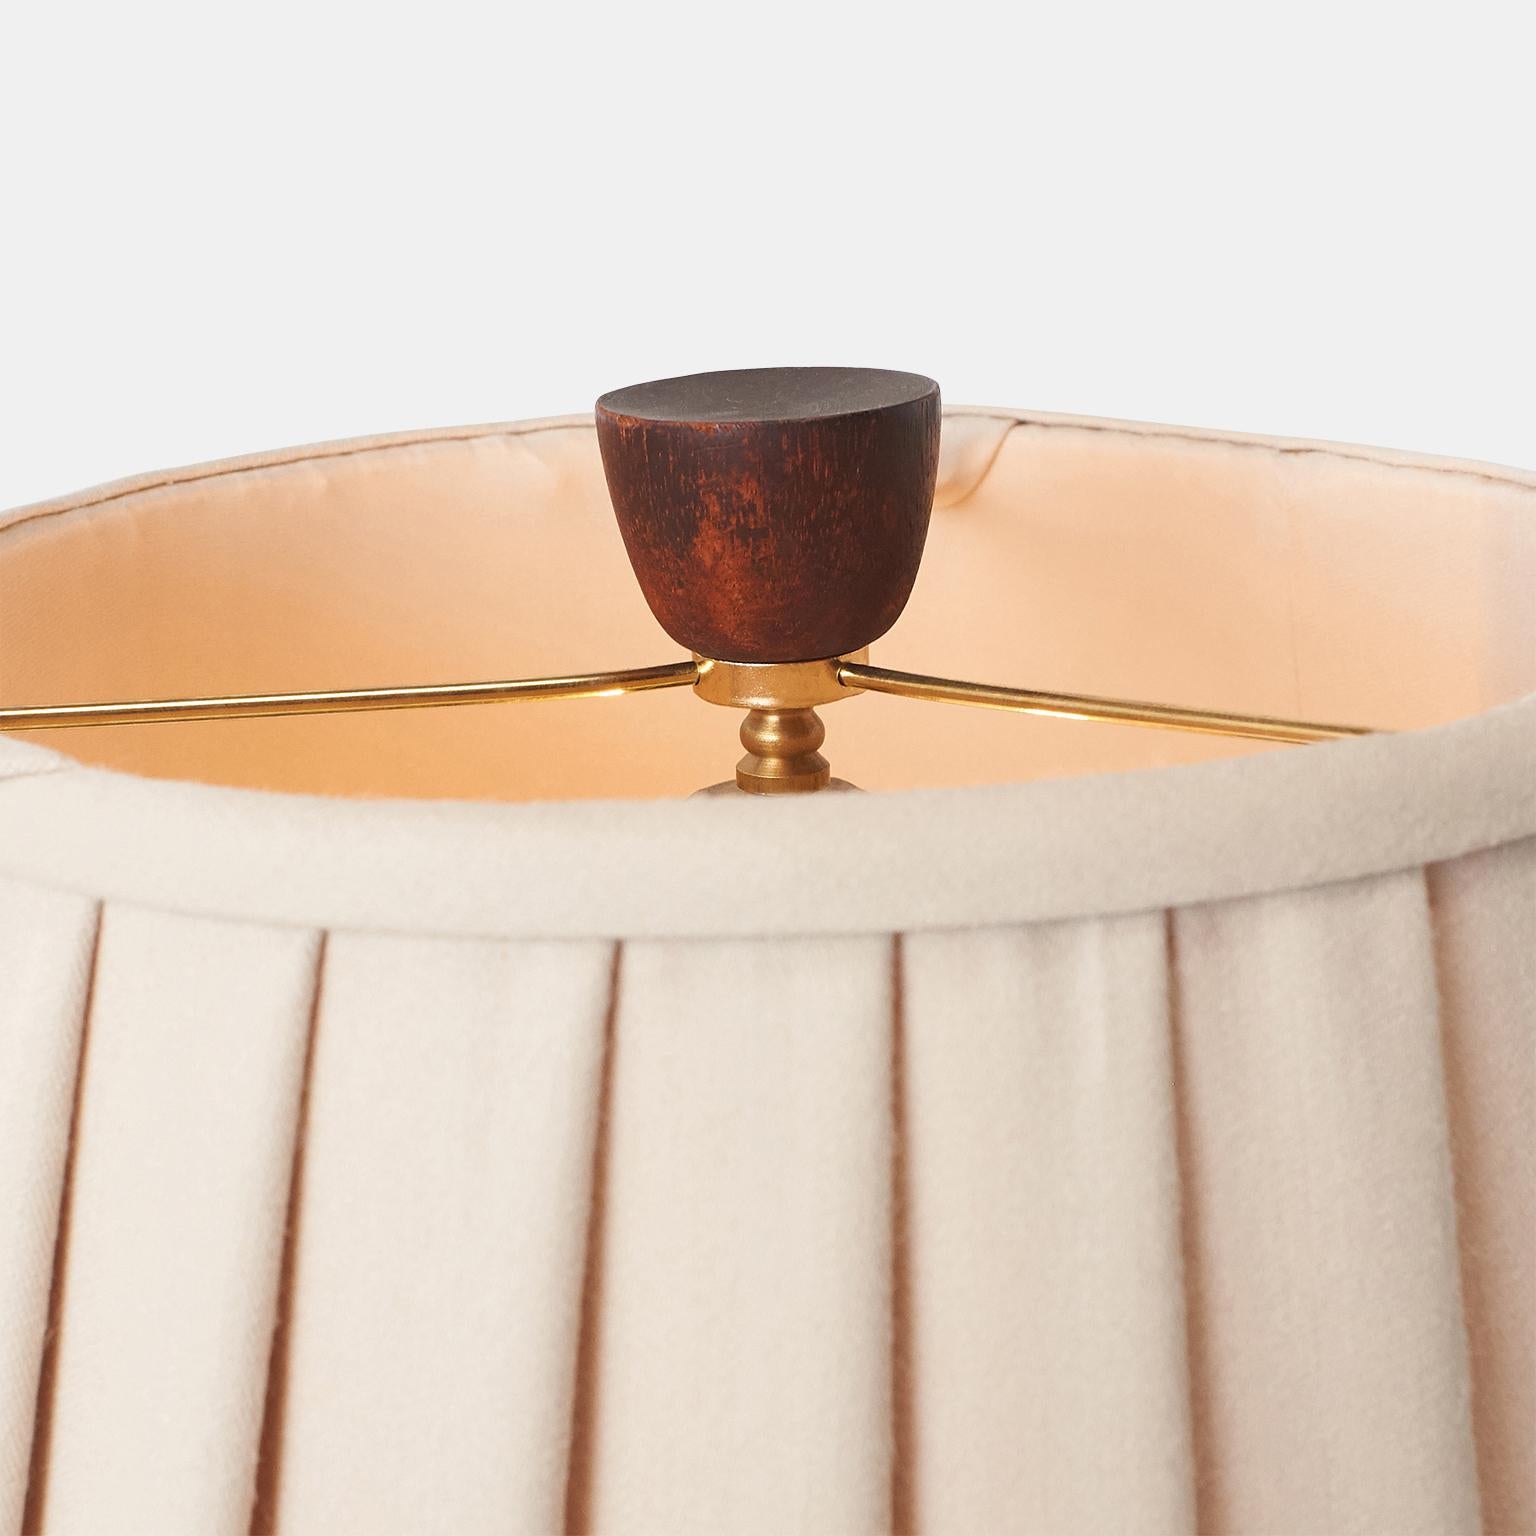 Modern Jane and Gordon Martz Table Lamp with Hand-Crafted Pleated Shade